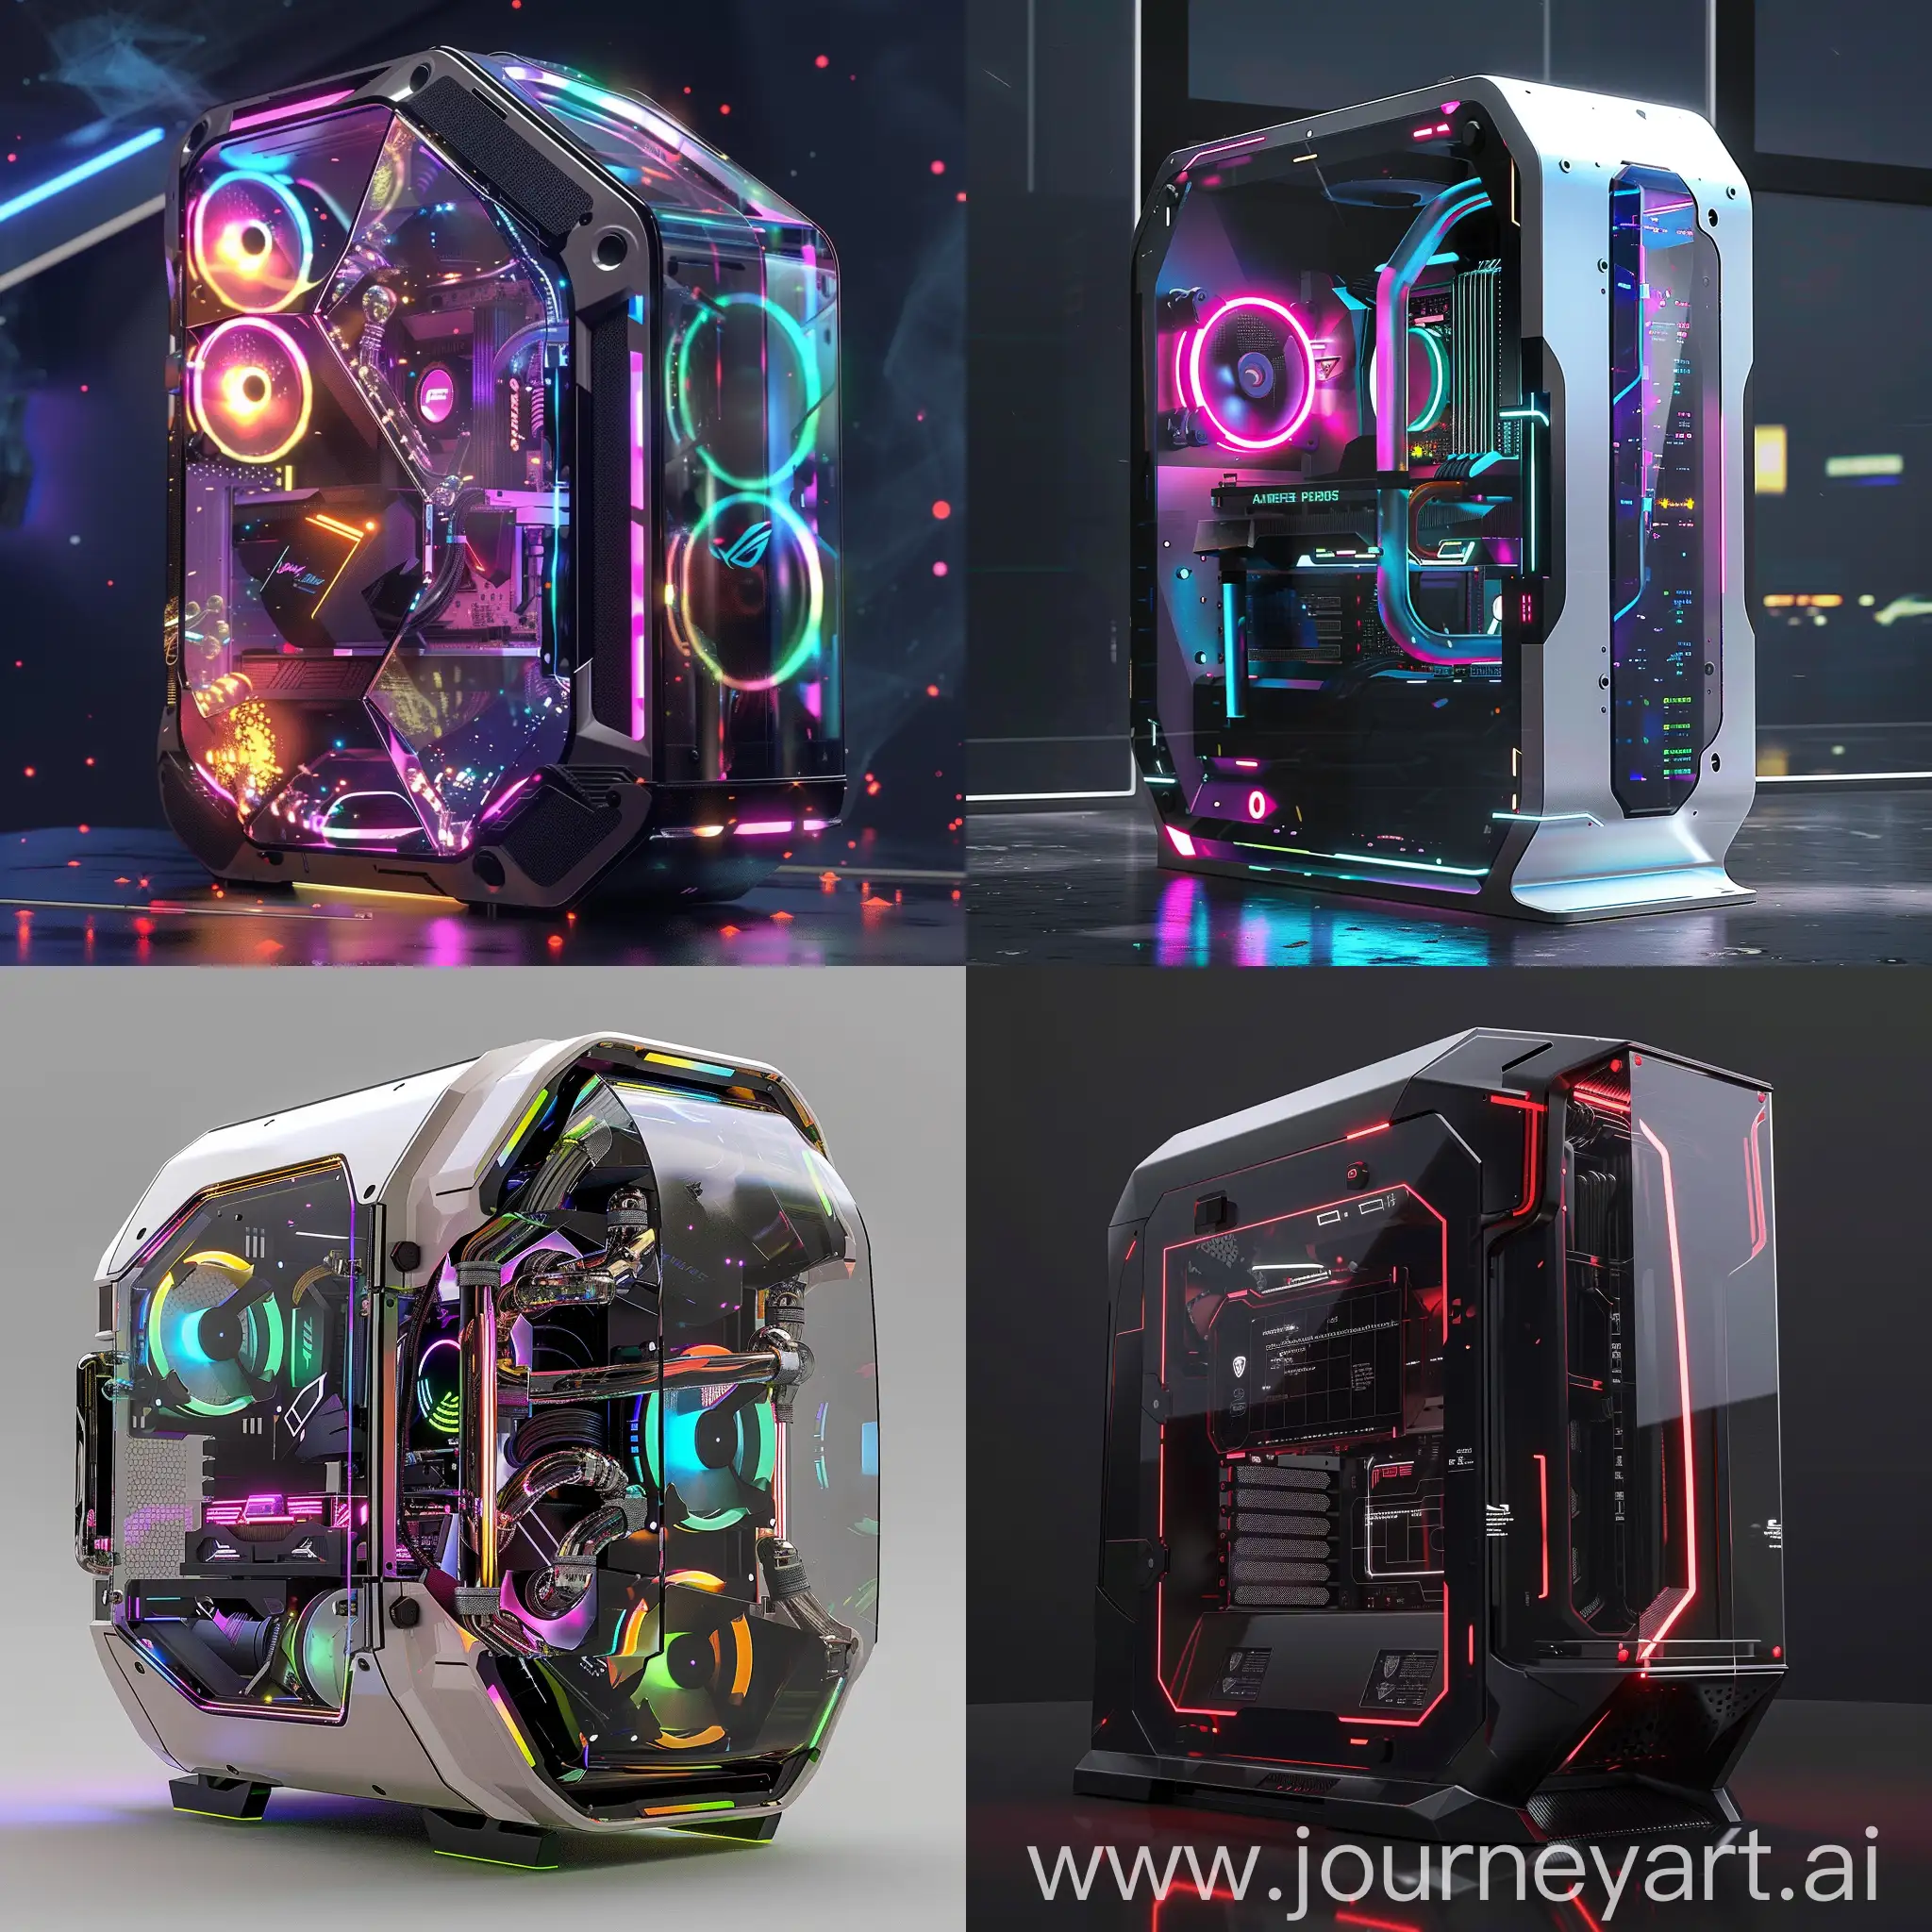 Futuristic-PC-Case-with-Integrated-Liquid-Cooling-and-EcoFriendly-Design